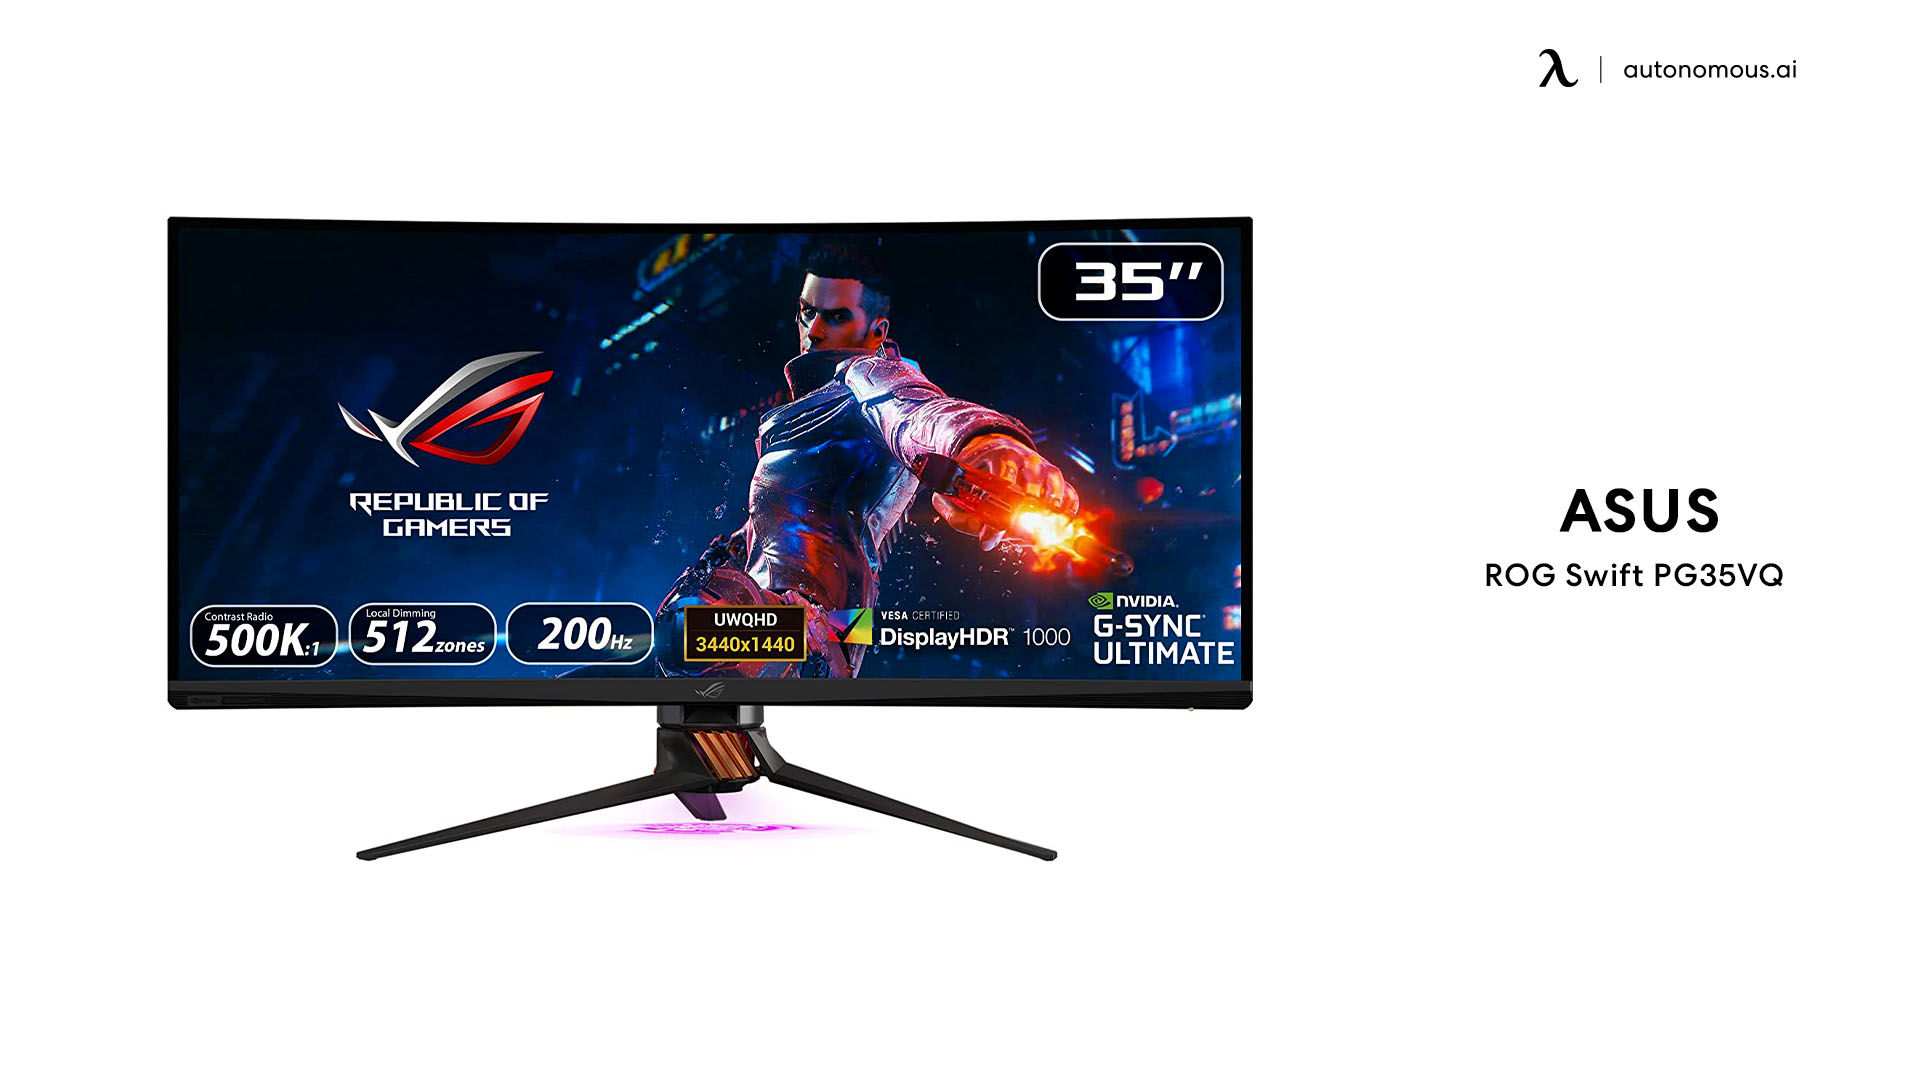 ASUS ROG Swift PG35VQ curved gaming monitor